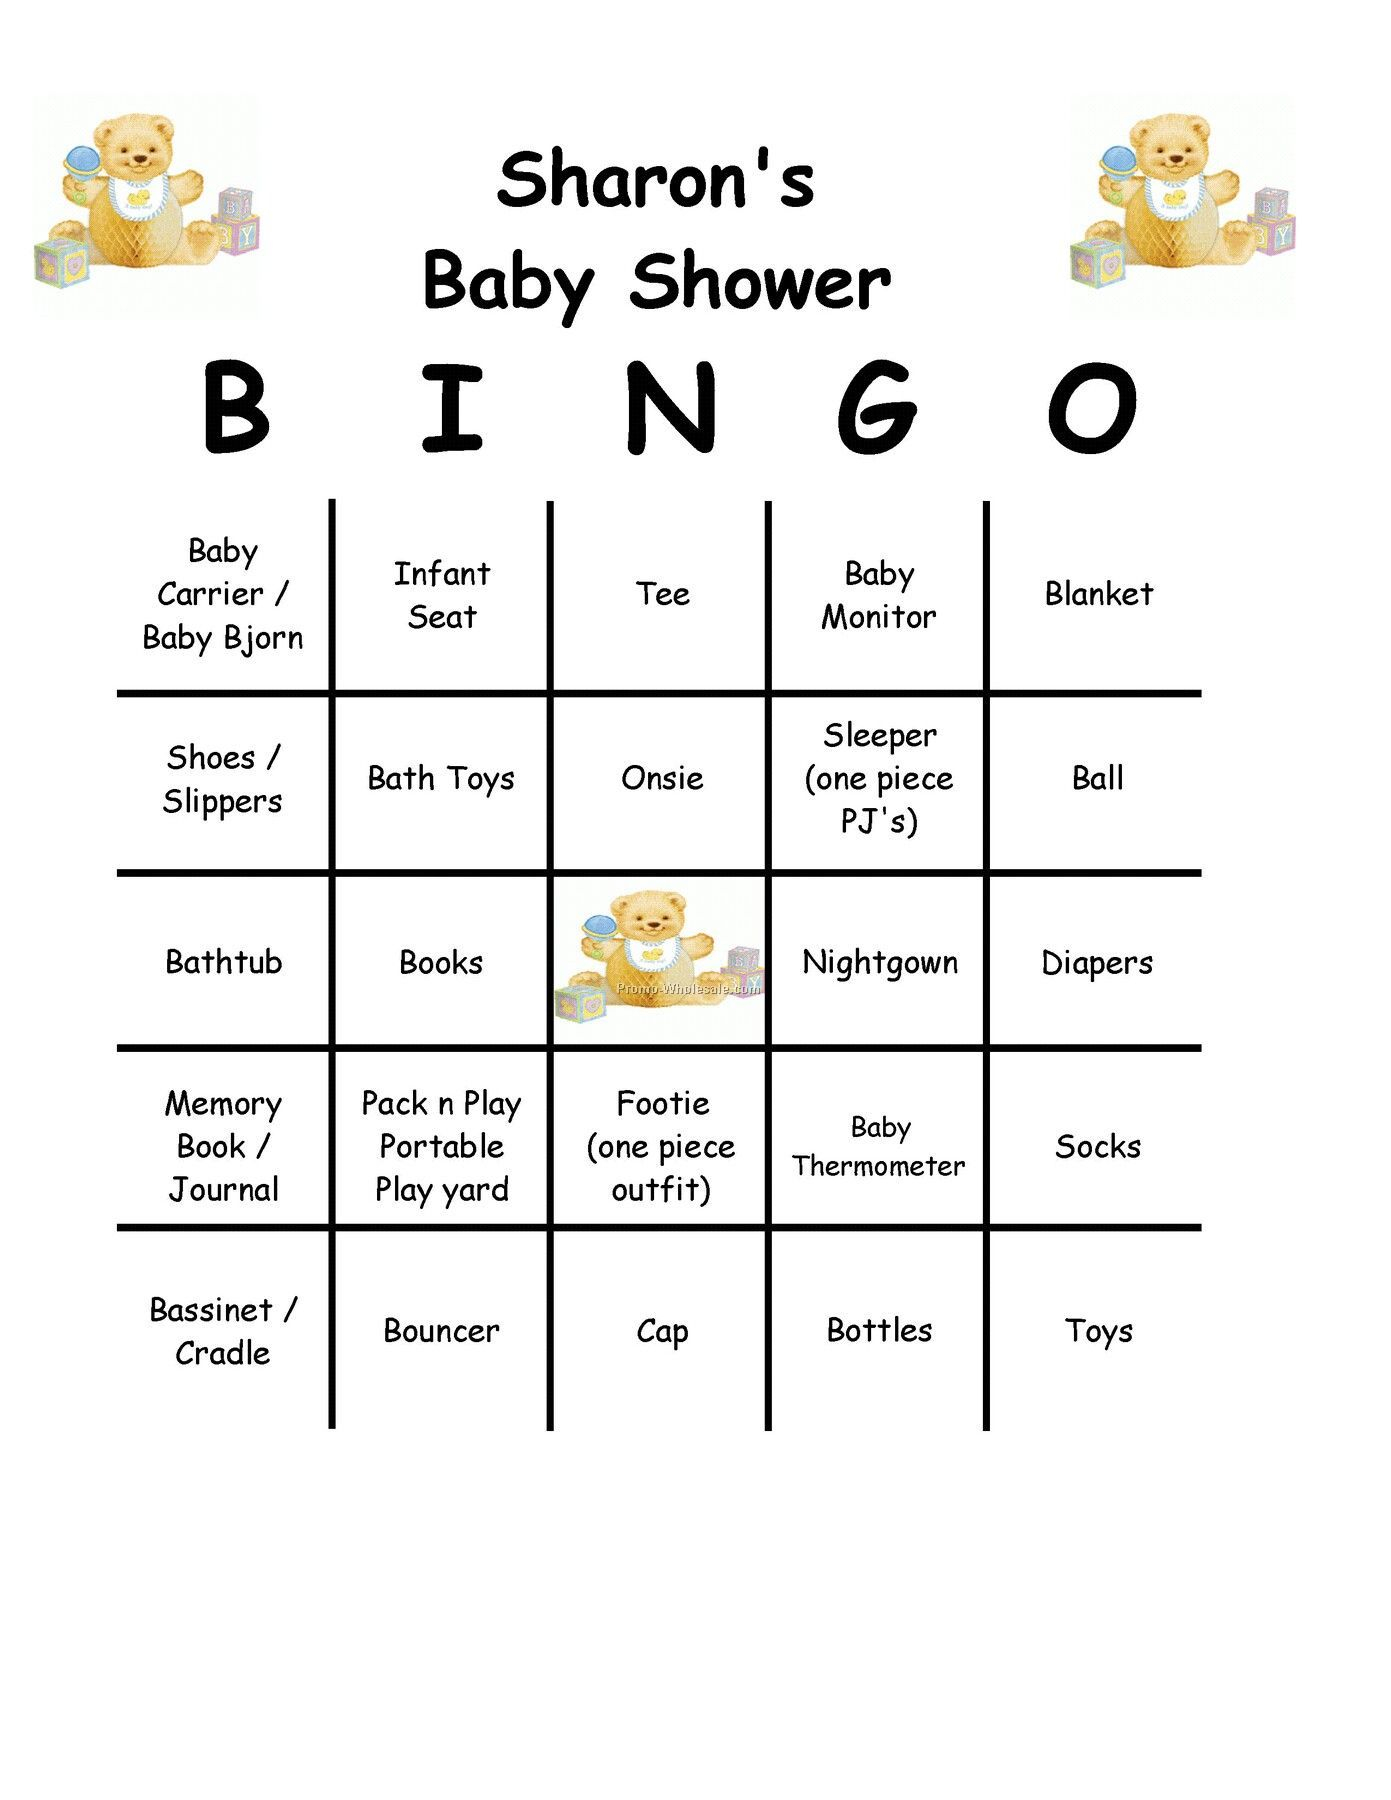 Photo : 7C33111211A686030De111057A3C87 Free Printable Minnie Image - Free Printable Baby Shower Games In Spanish